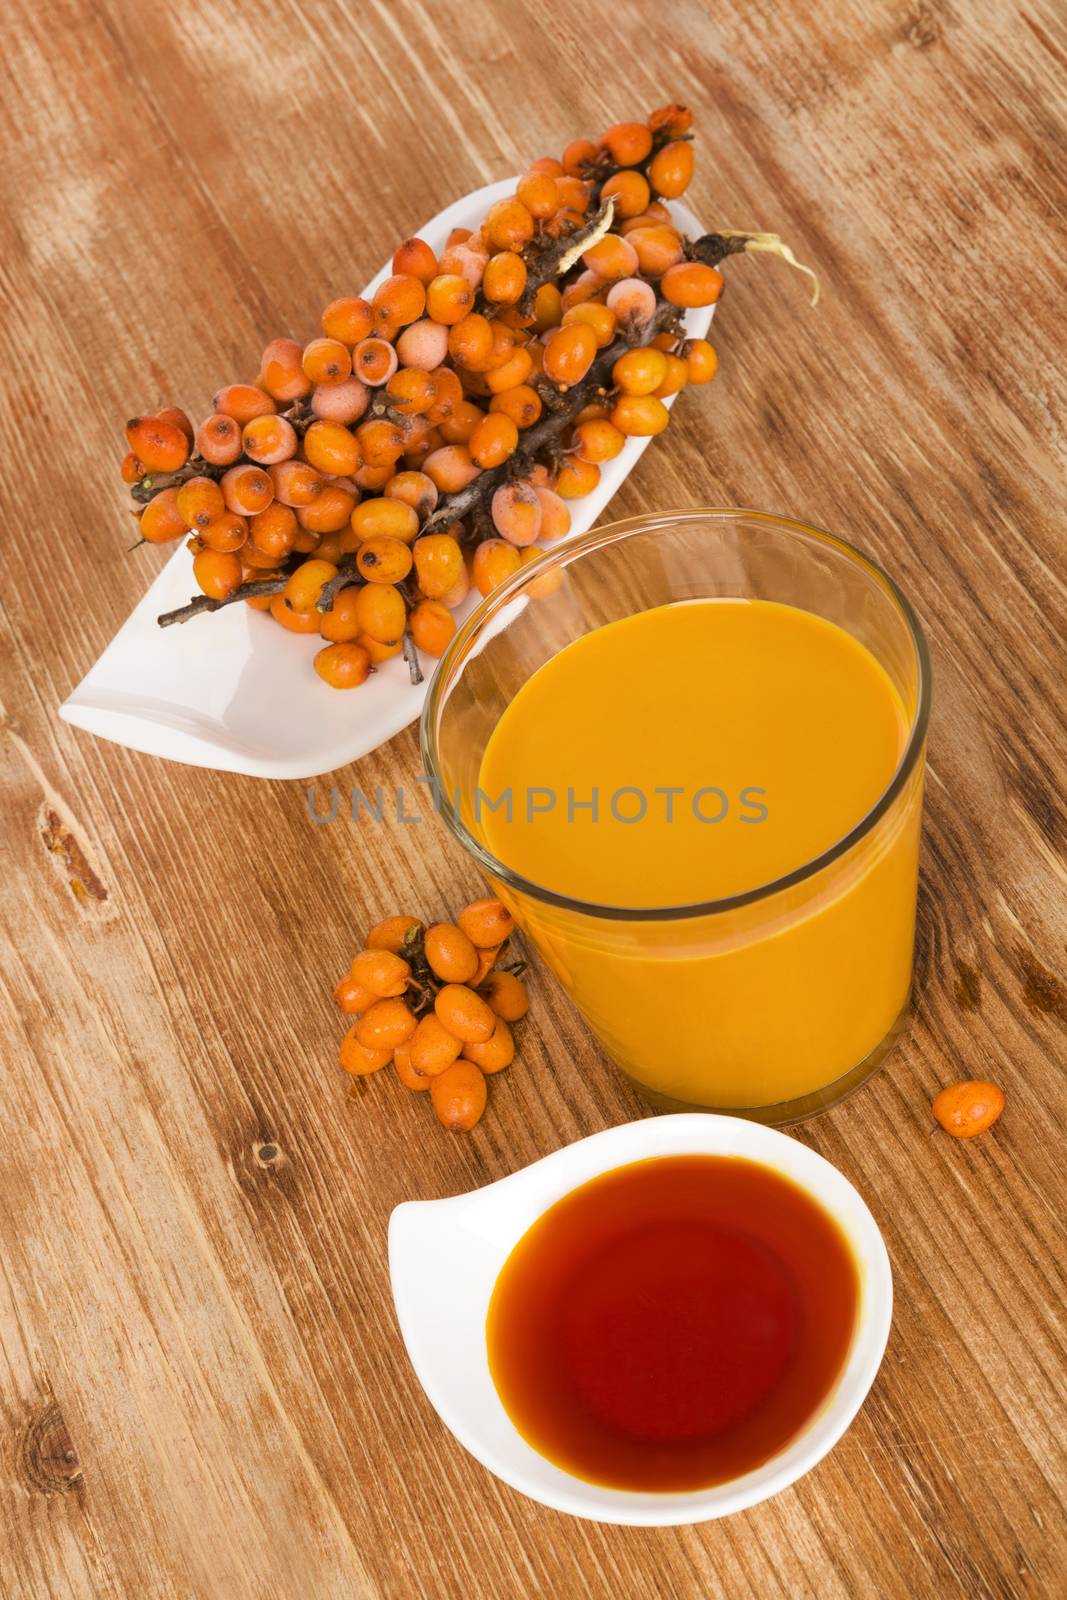 Sea buckthorn juice, oil and berries isolated on wooden background. Natural, healthy vitamin and detox.